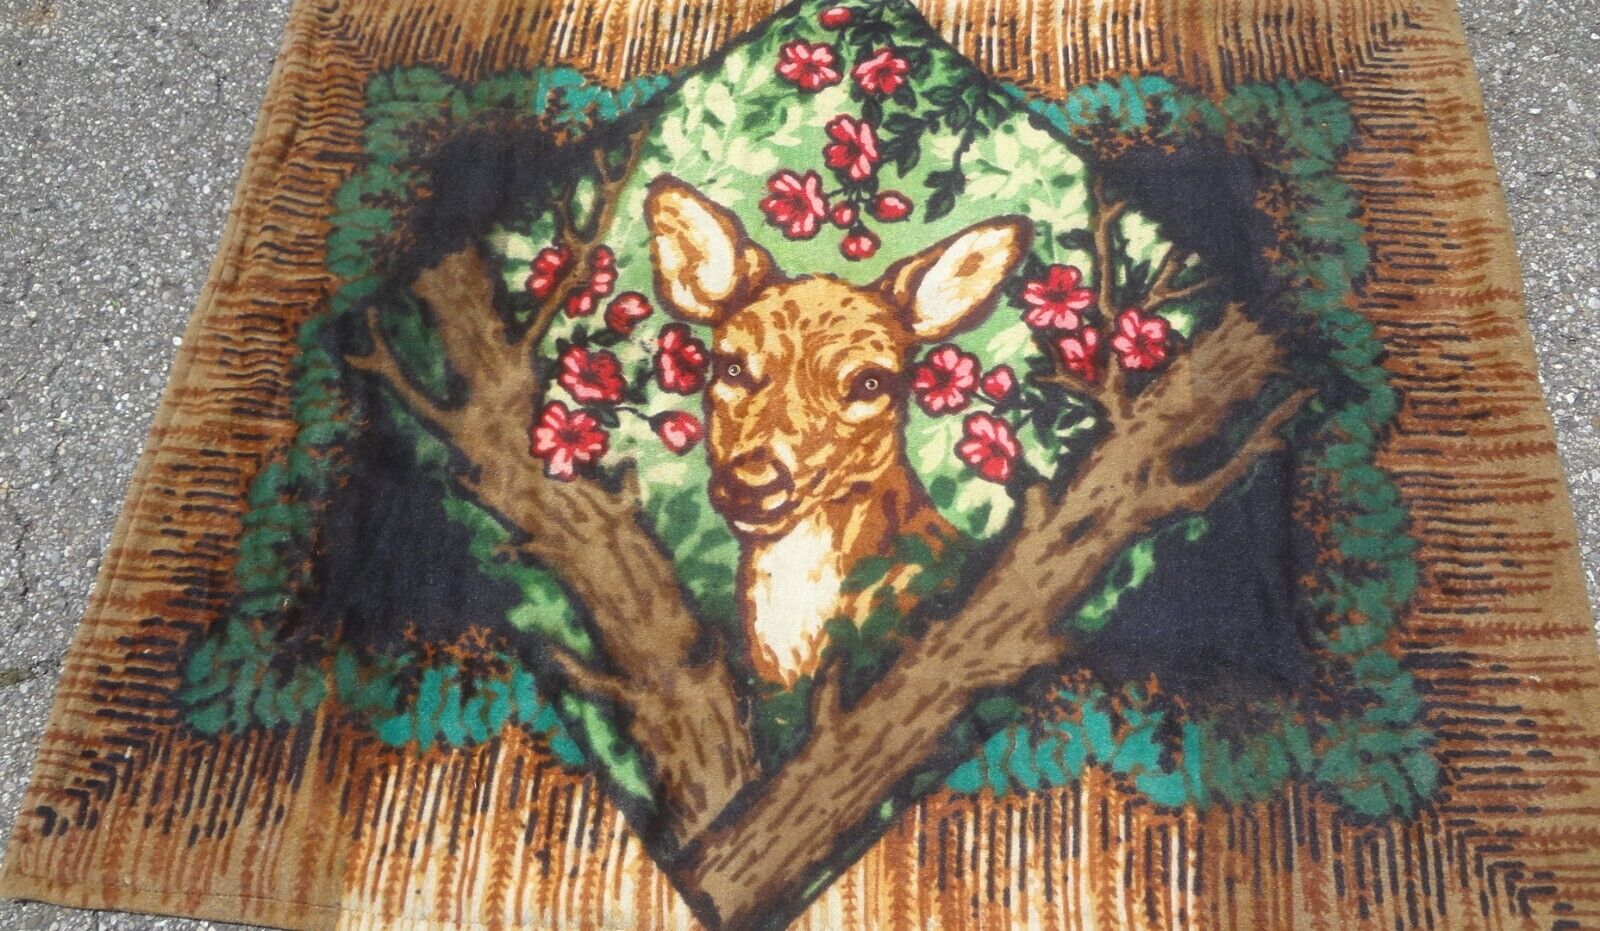 e1900\'s ANTIQUE signed CHASE WOOL 5\' BUGGY ROBE with GLASS EYED DEER - NICE FIND